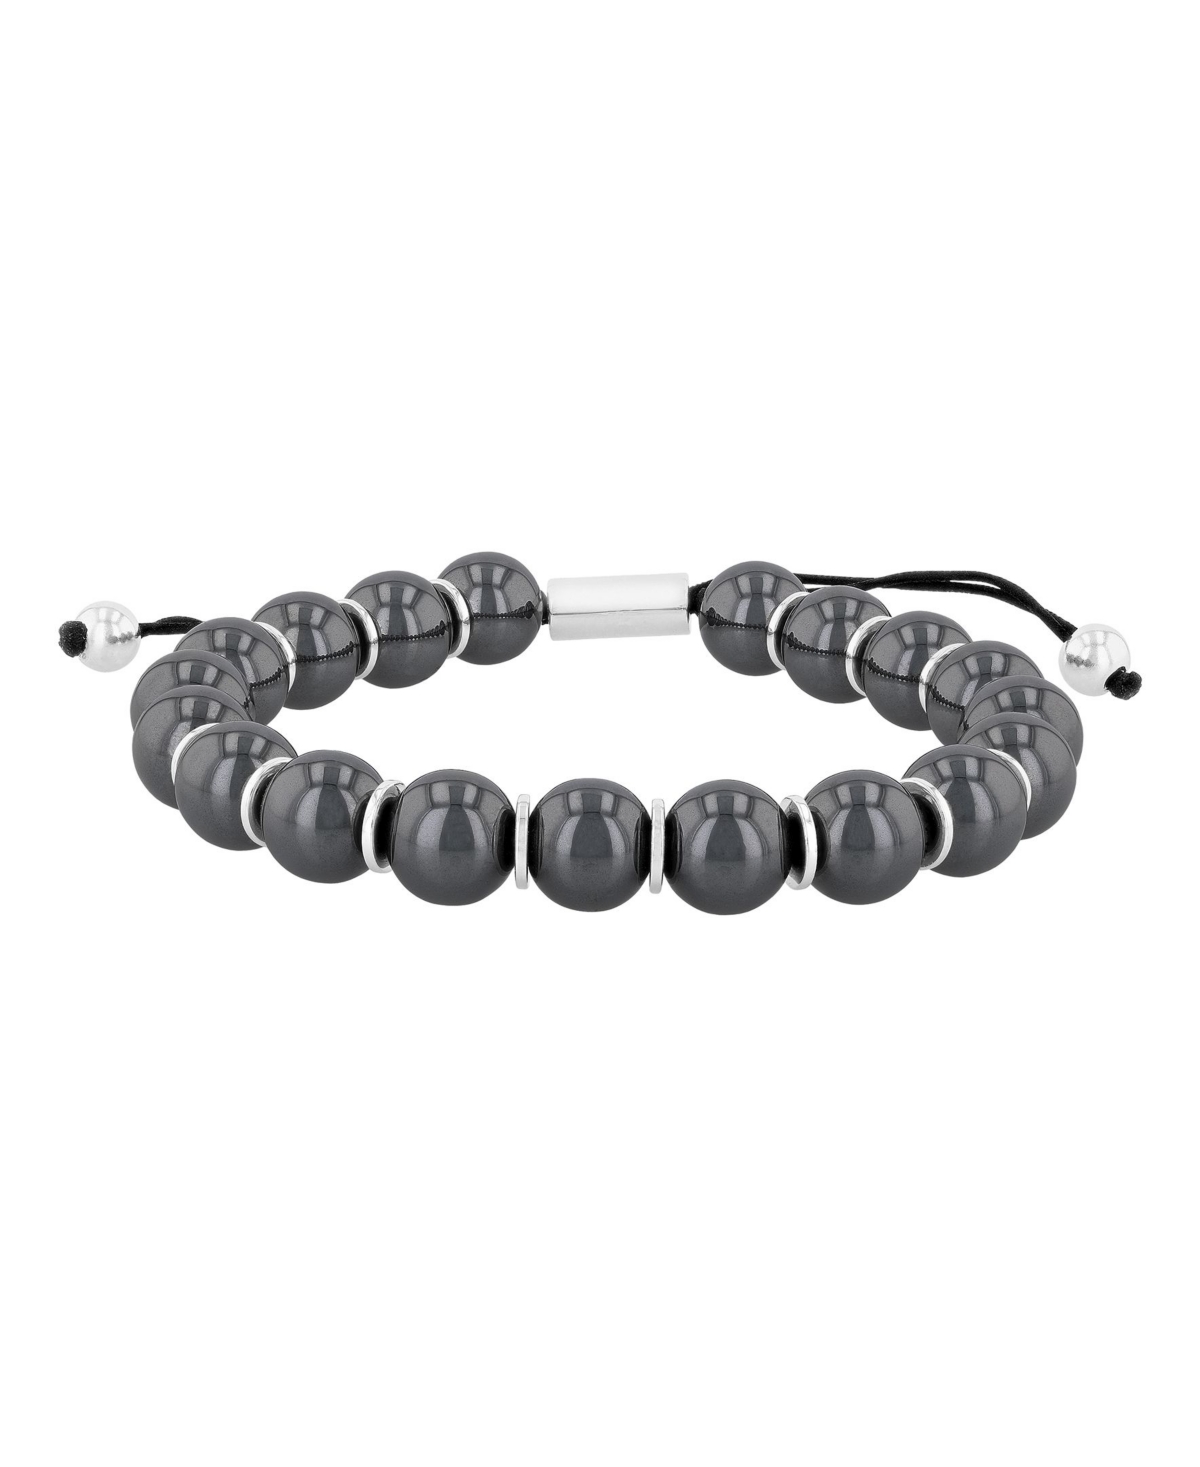 C & c Jewelry Men's Hematite Bead with.925 Sterling Silver Accents Bolo Bracelet